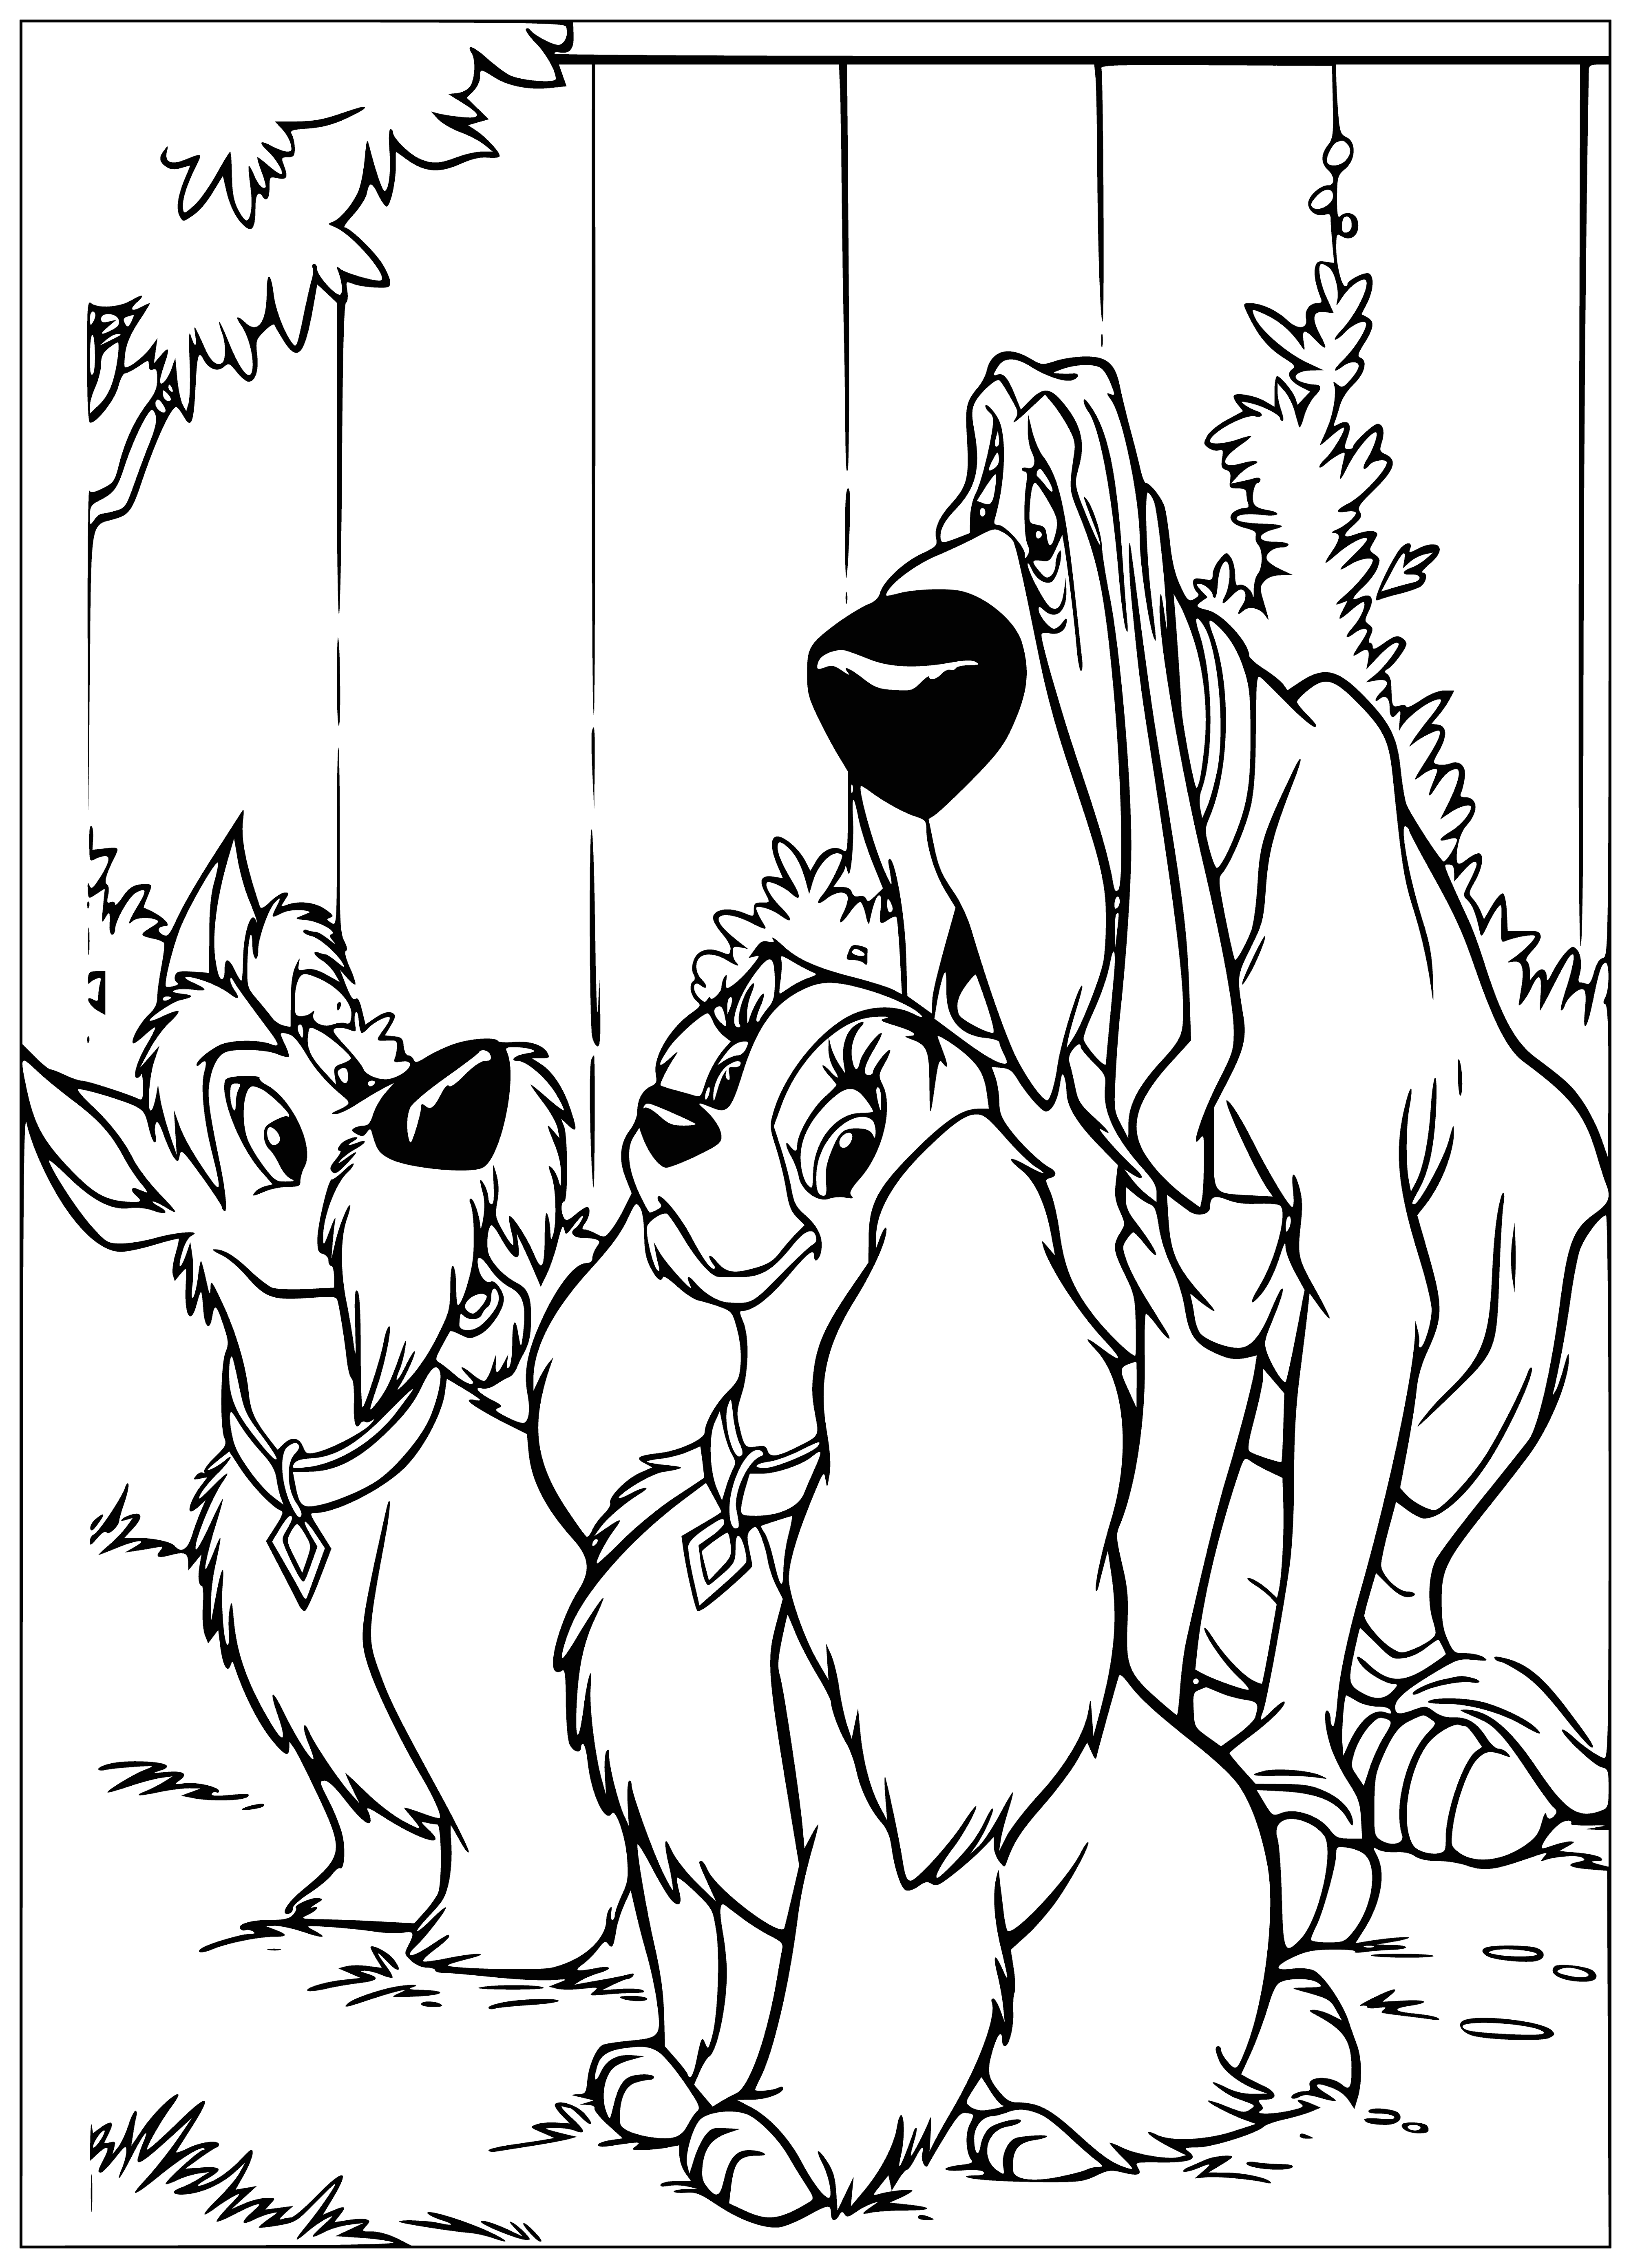 coloring page: Lady embarrassed. Tramp, devilish grin. He caused trouble.